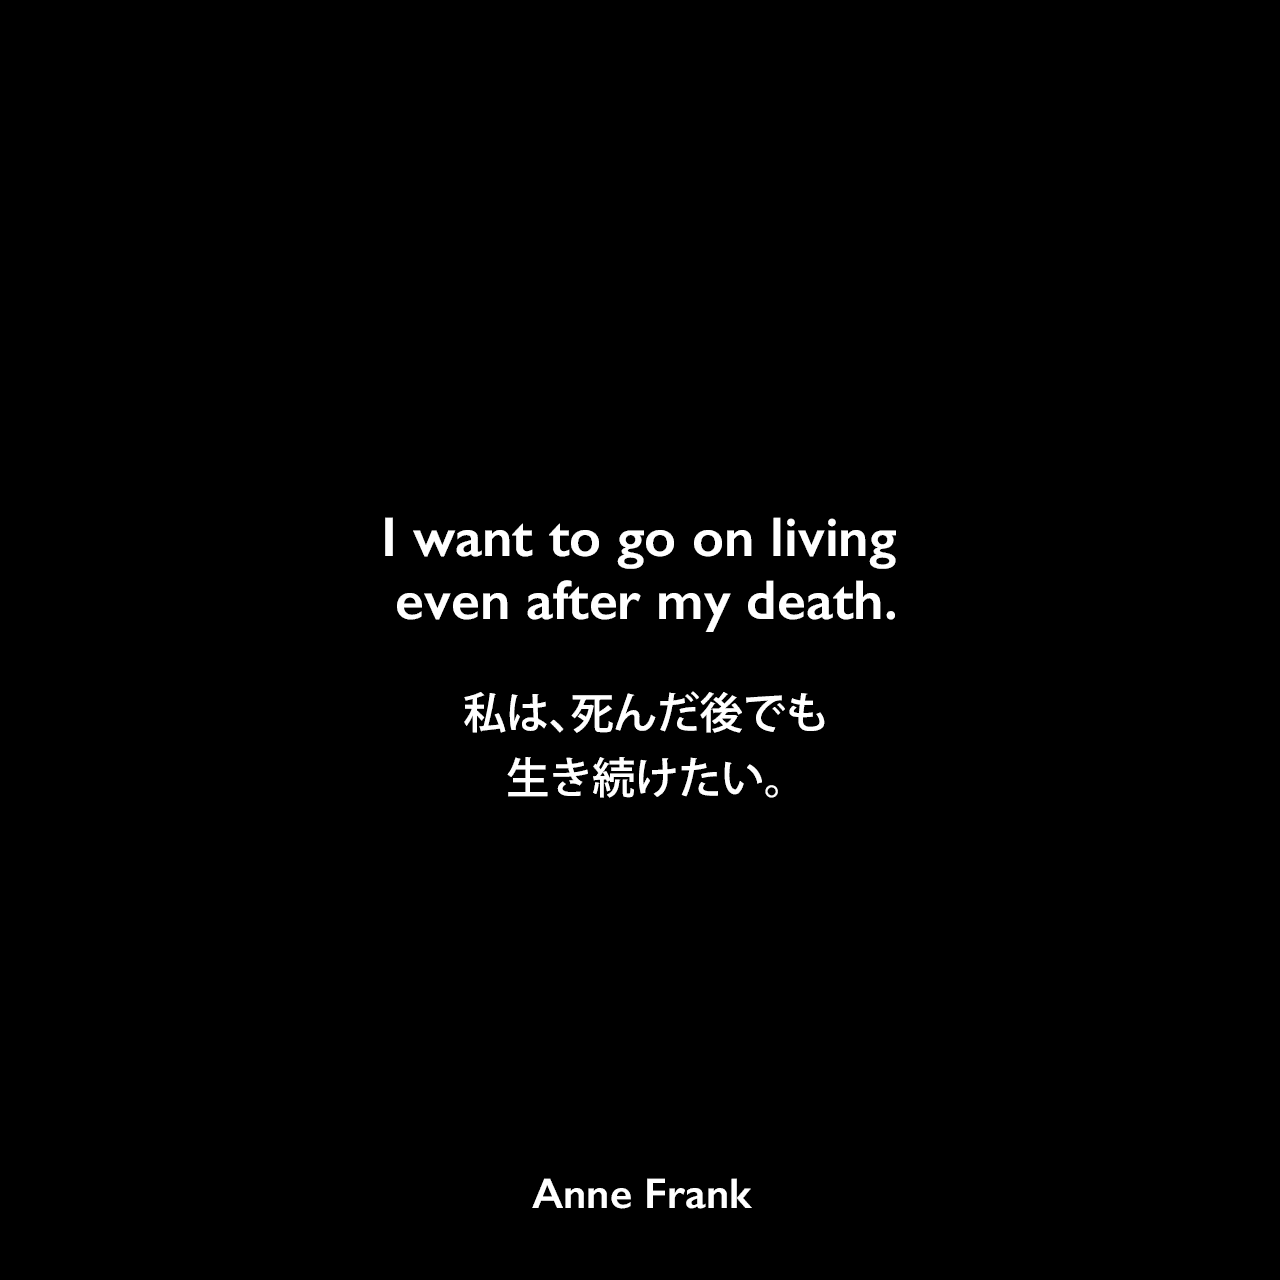 I want to go on living even after my death.私は、死んだ後でも、生き続けたい。- 「アンネの日記」よりAnne Frank